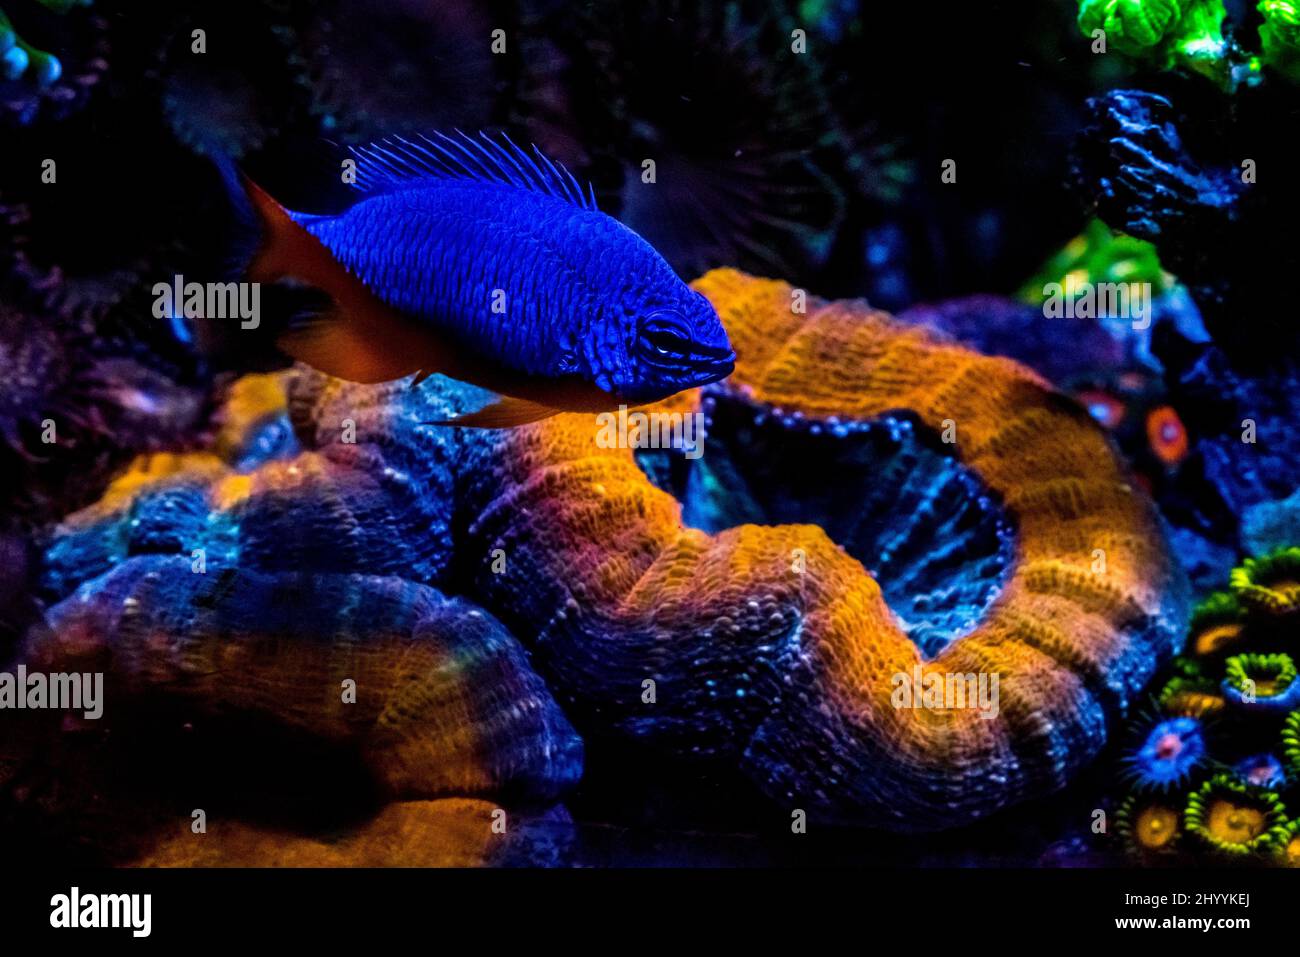 Underwater view of a Kupang Damsel Fish and Seaworld Reef Corals Stock Photo